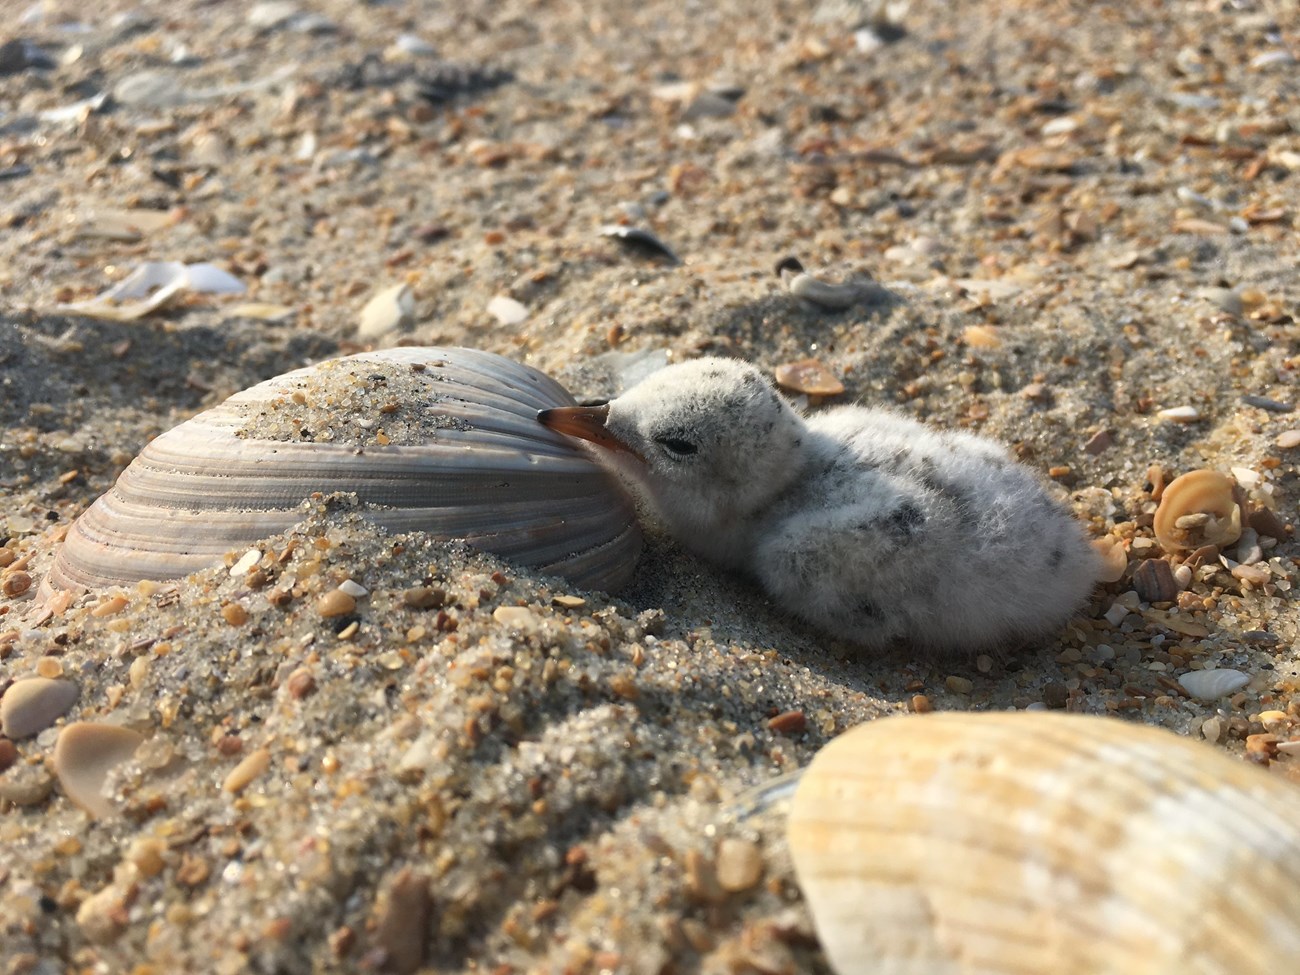 A grey chick with black spots lays on its belly next to a seashell as big as it on the sand.